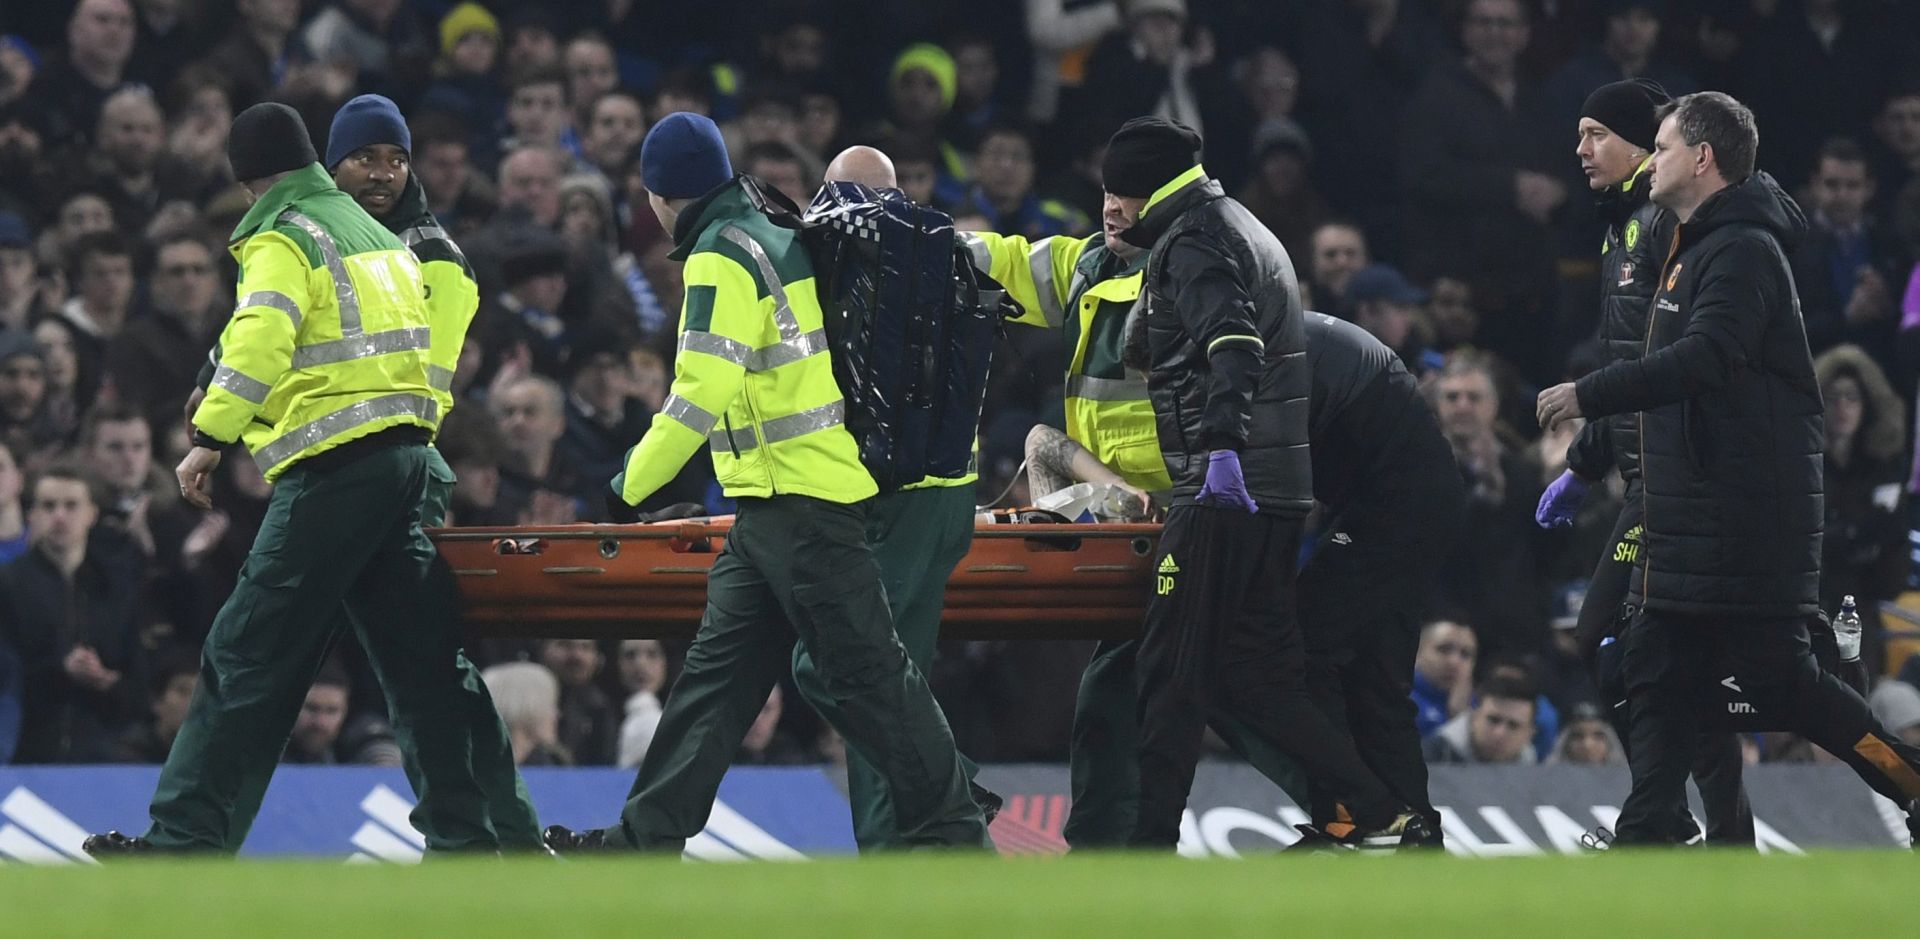 epa05742137 Hull City's Ryan Mason (C) is taken off the pitch by medical teams after a collision with Chelsea's Gary Cahill during the English Premier League soccer match between Chelsea FC and Hull City at Stamford Bridge, London, Britain, 22 January 2017. EDITORIAL USE ONLY. No use with unauthorized audio, video, data, fixture lists, club/league logos or 'live' services. Online in-match use limited to 75 images, no video emulation. No use in betting, games or single club/league/player publications  EPA/WILL OLIVER